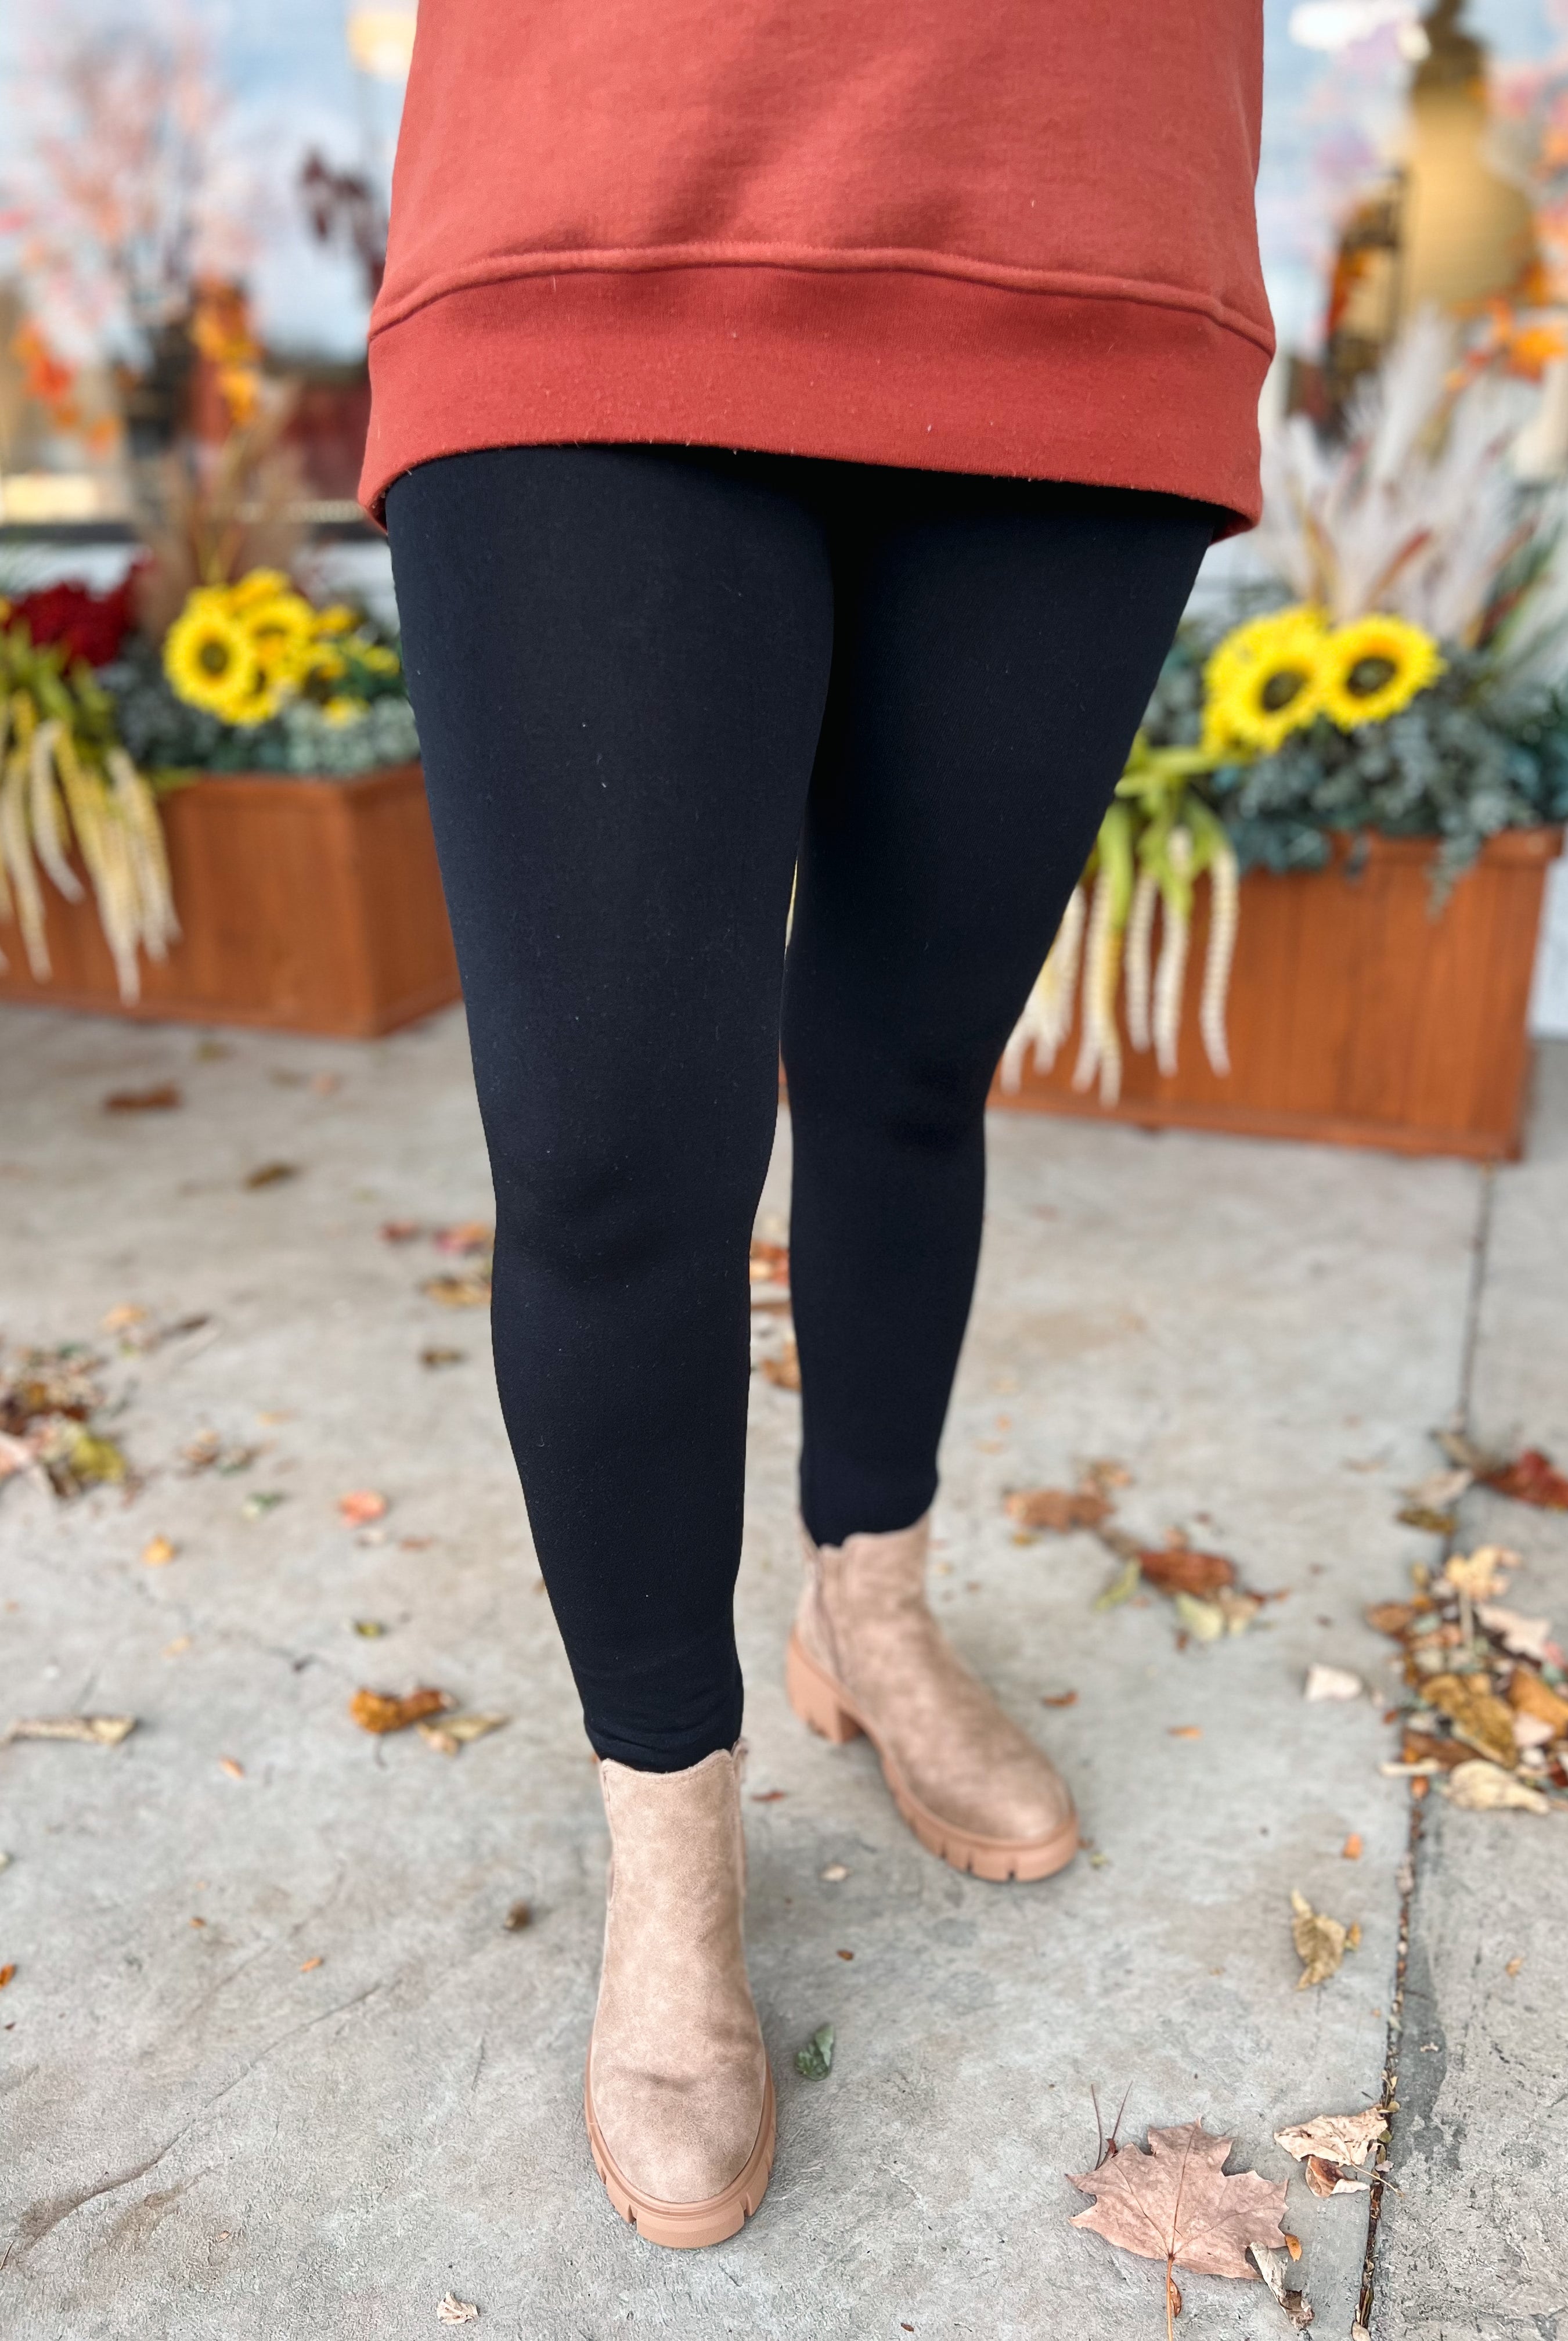 Fleece Lined Leggings Misses 2024-220 Joggers/Leggings-The Lovely Closet-The Lovely Closet, Women's Fashion Boutique in Alexandria, KY